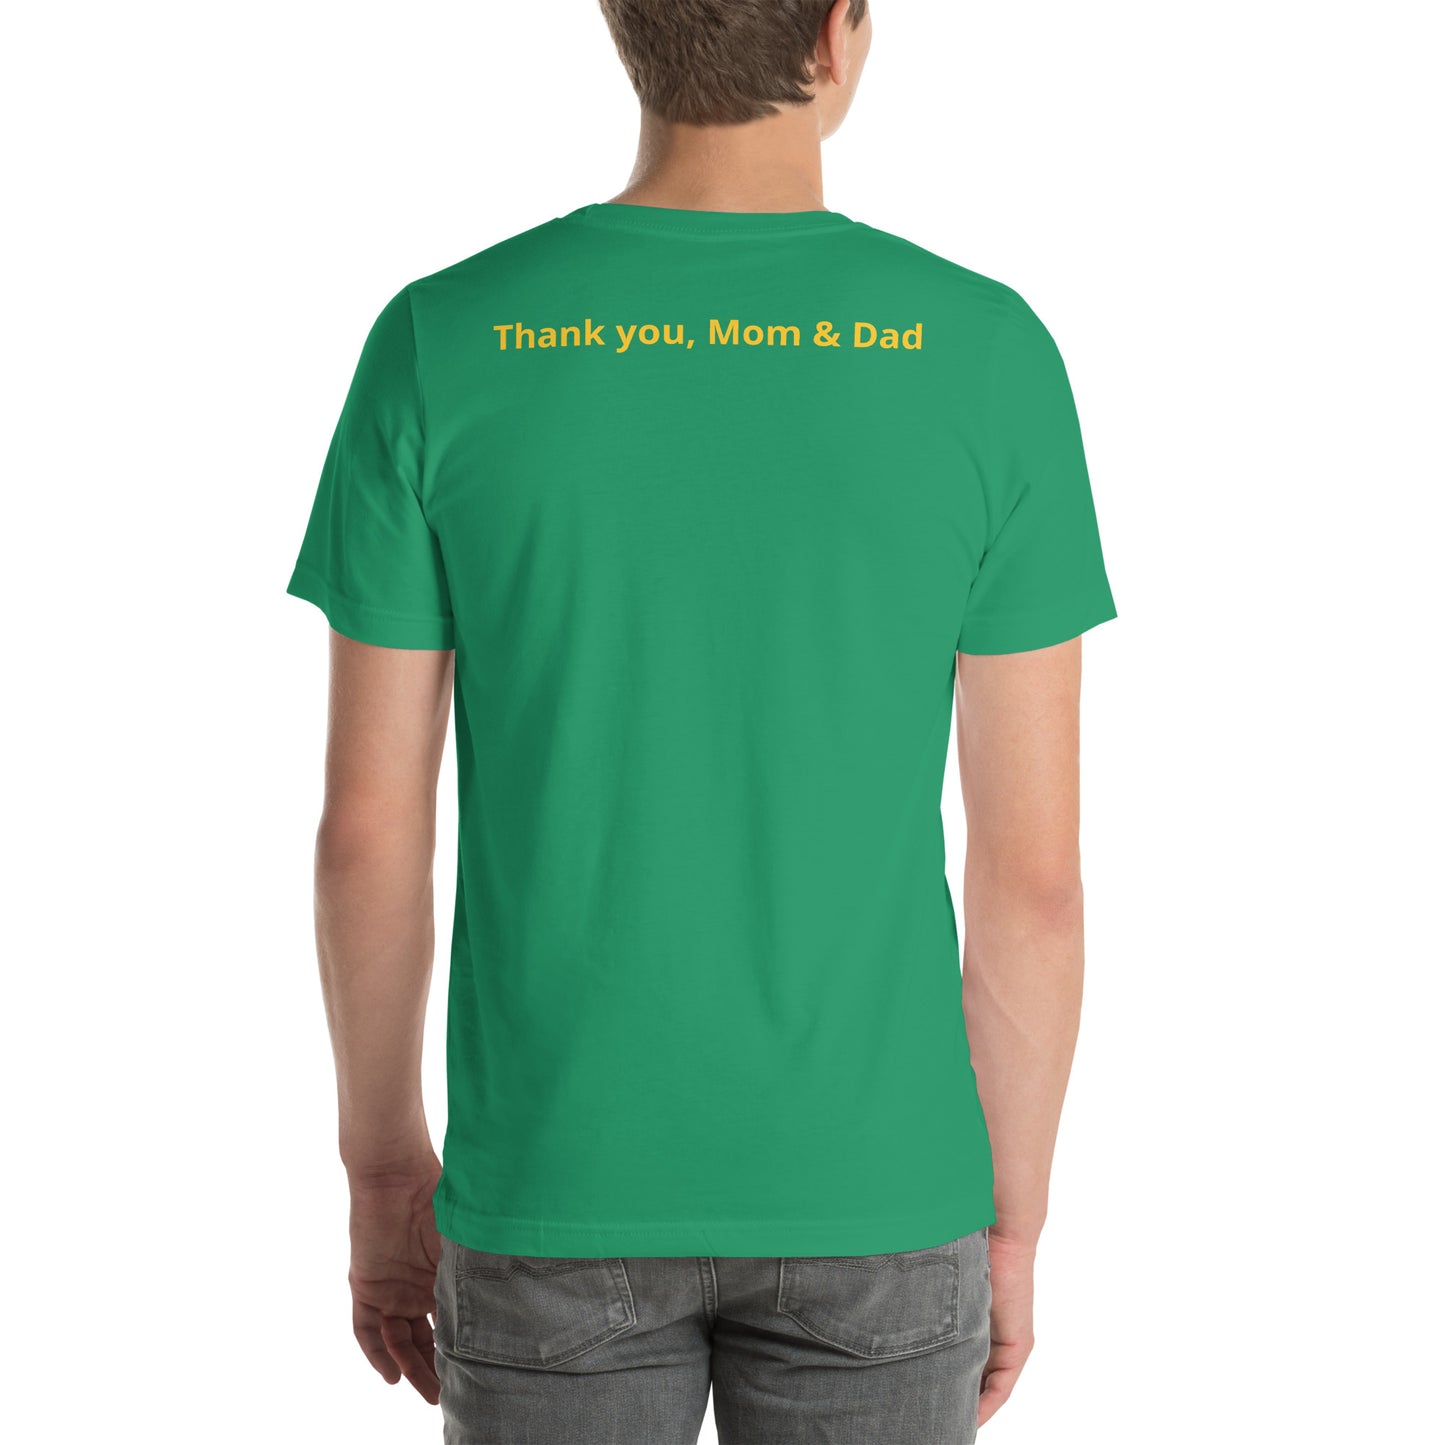 Green color short sleeve unisex tee shirt that says "College '24 Grad" on the front and "Thank you, Mom & Dad" on the back in yellow-gold font